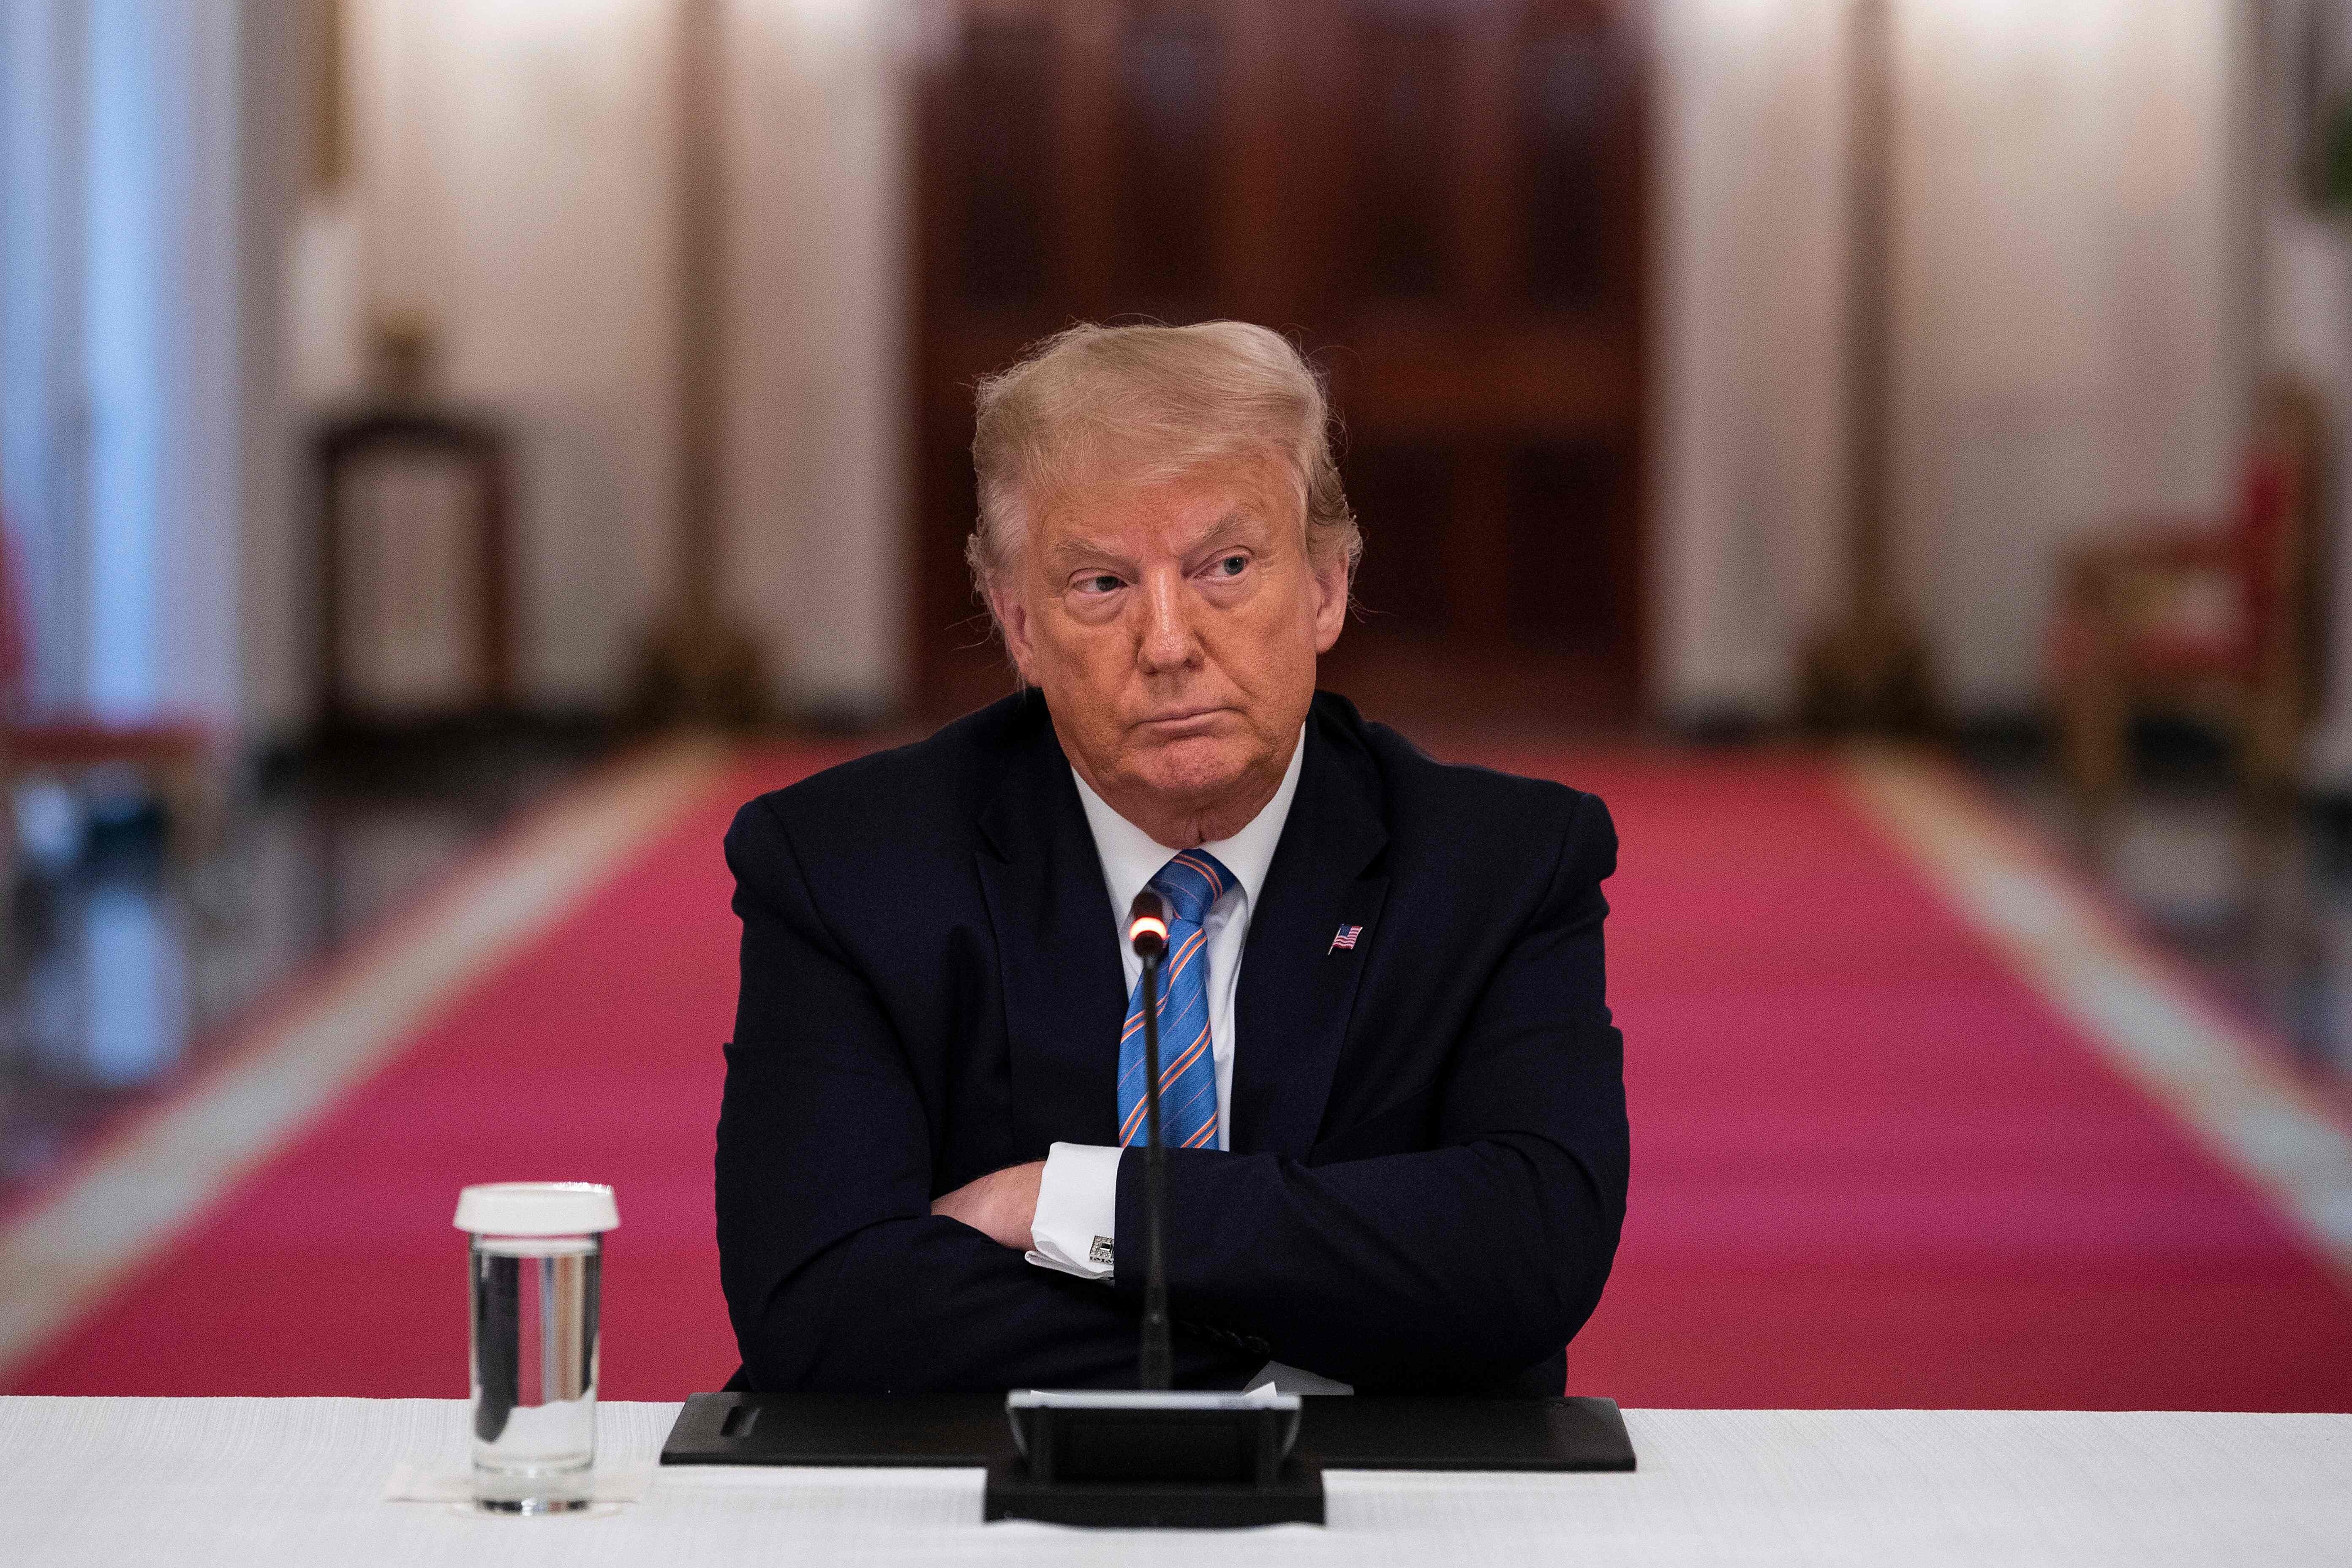 US President Donald Trump heads a meeting in the East Room of the White House in Washington on July 7. Trump’s “Executive Order on Hong Kong Normalisation” on July 14 set in motion the termination of the Fulbright exchange programme with Hong Kong and the rest of China. Photo: AFP